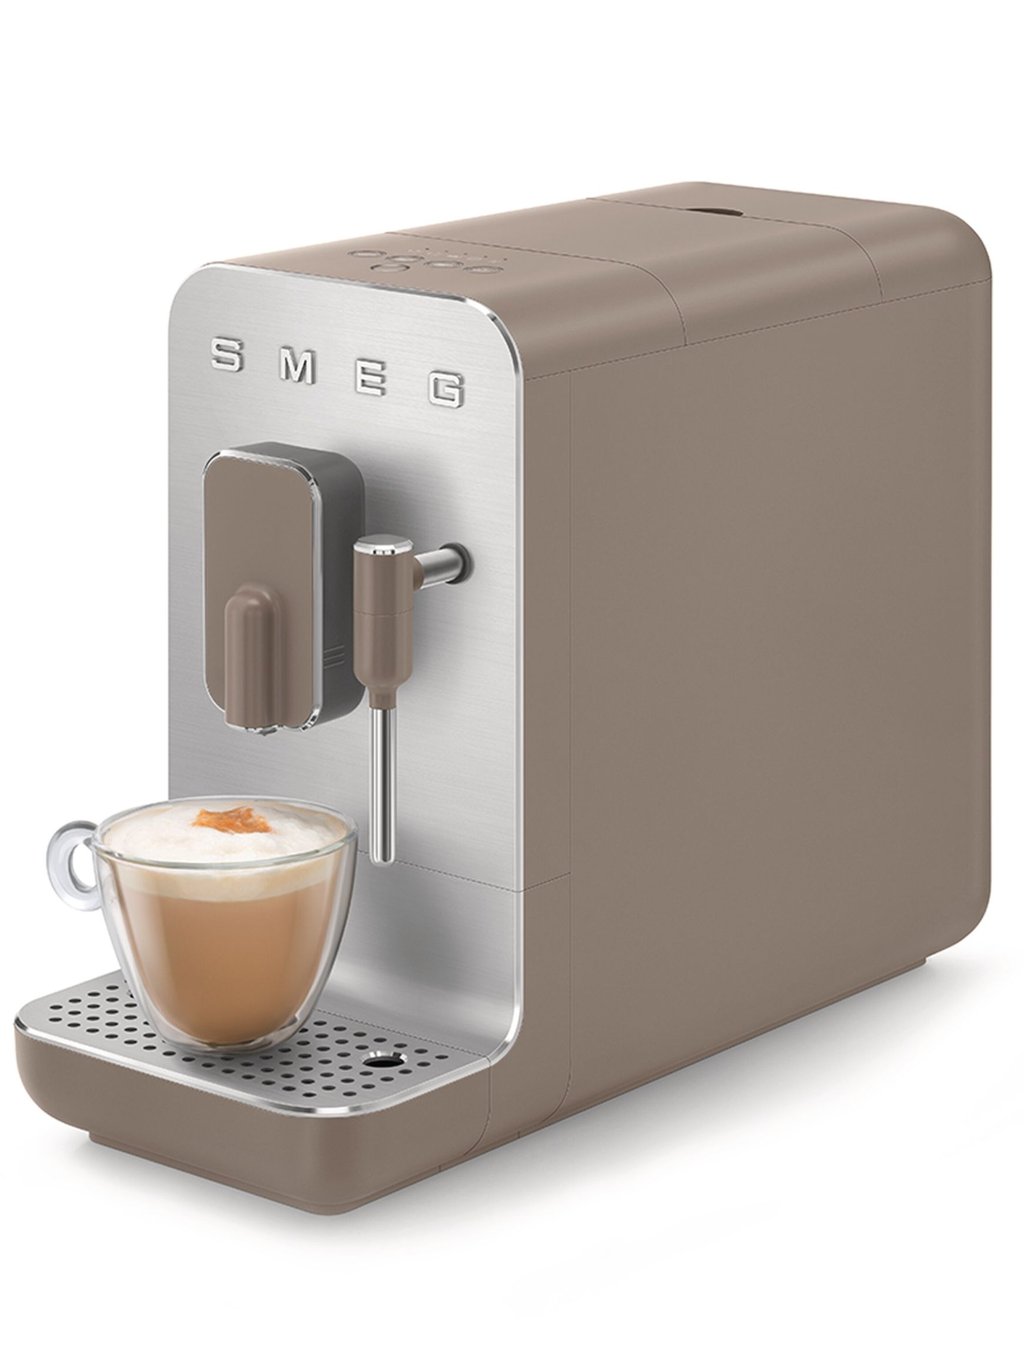 cool-gifts-to-celebrate-her-this-holiday-bean-to-cup-coffee-machine-smeg